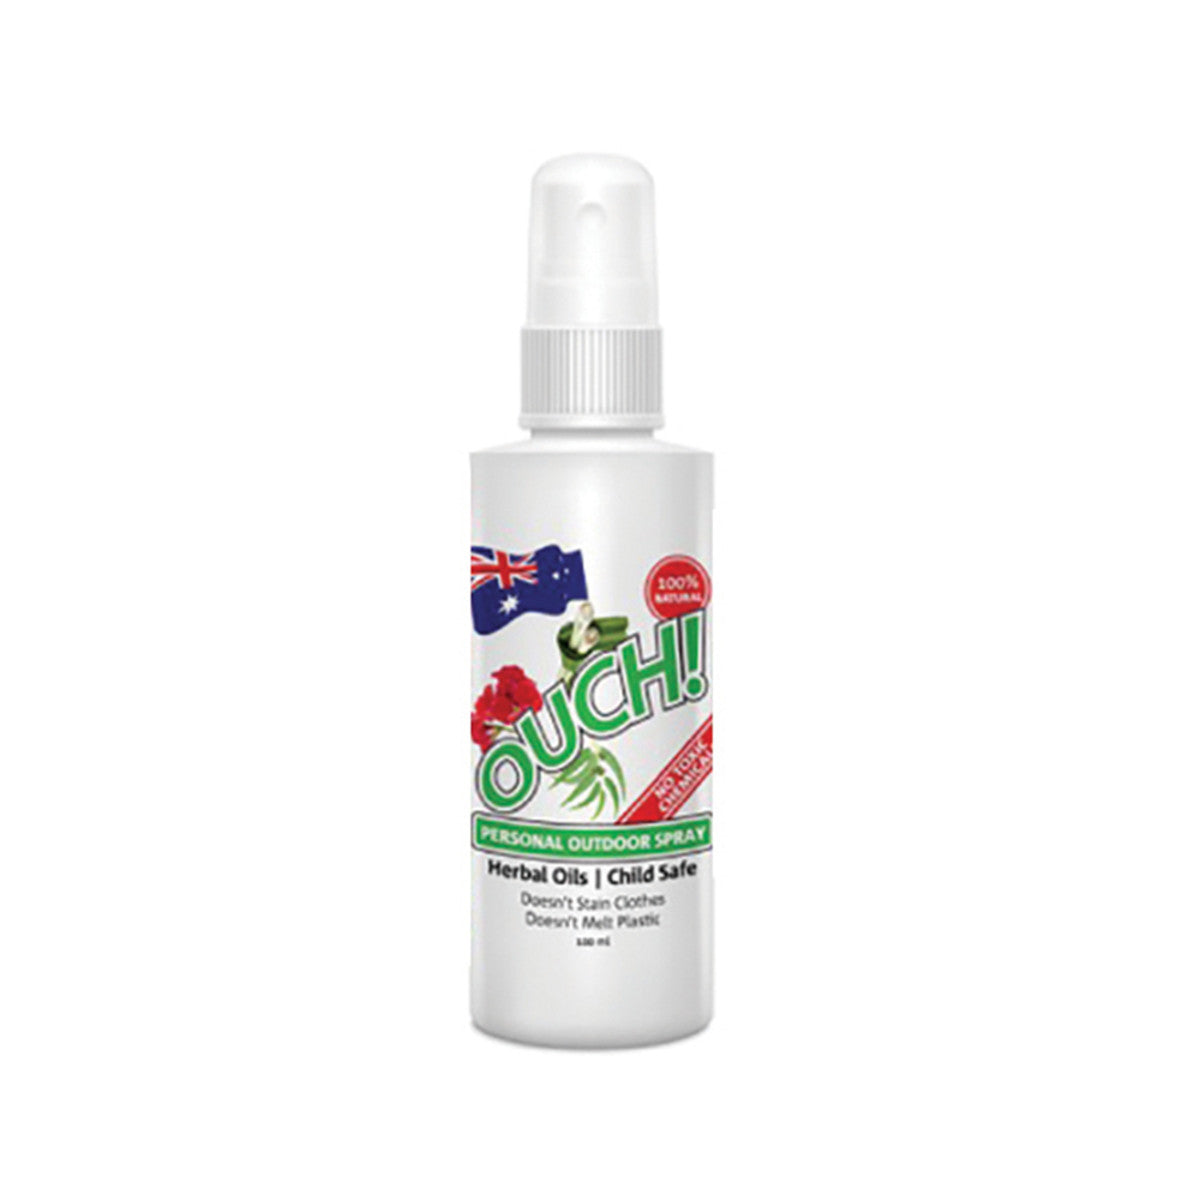 Ouch! Herbal Personal Outdoor 100ml Spray